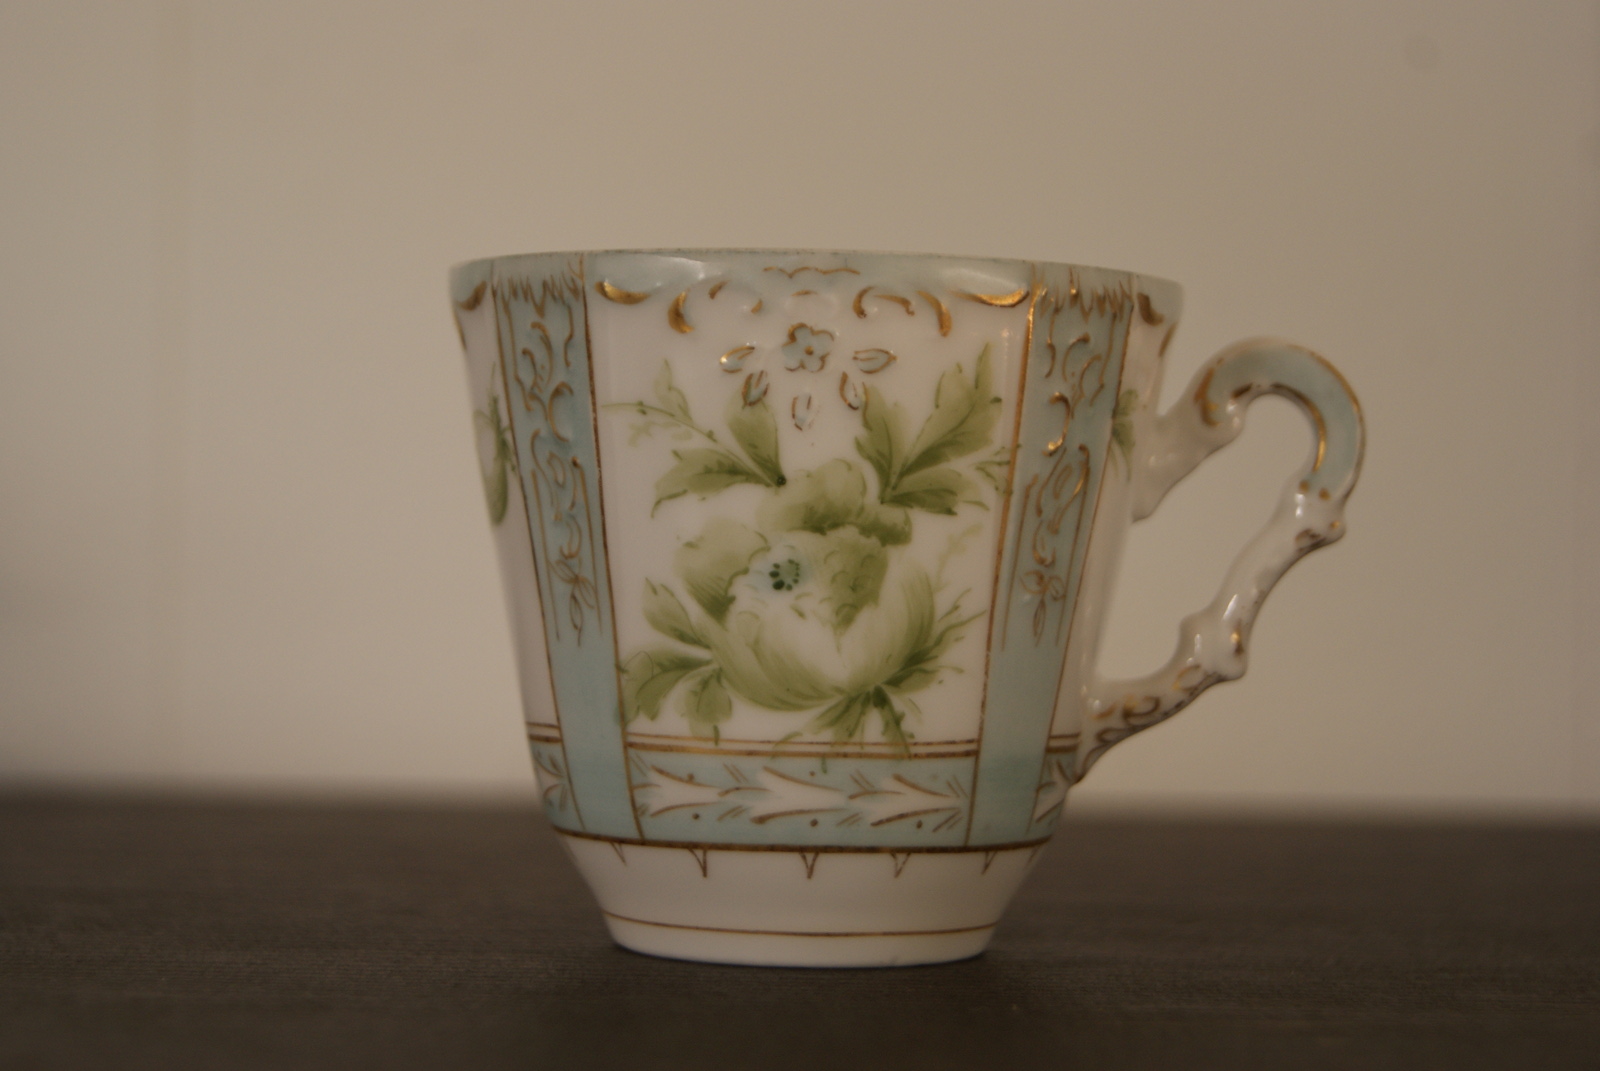 Niedersaltzbrunn Hermann Ohme cup with saucer and plate, handpainted green flowers and leaves, blue color, golden decor